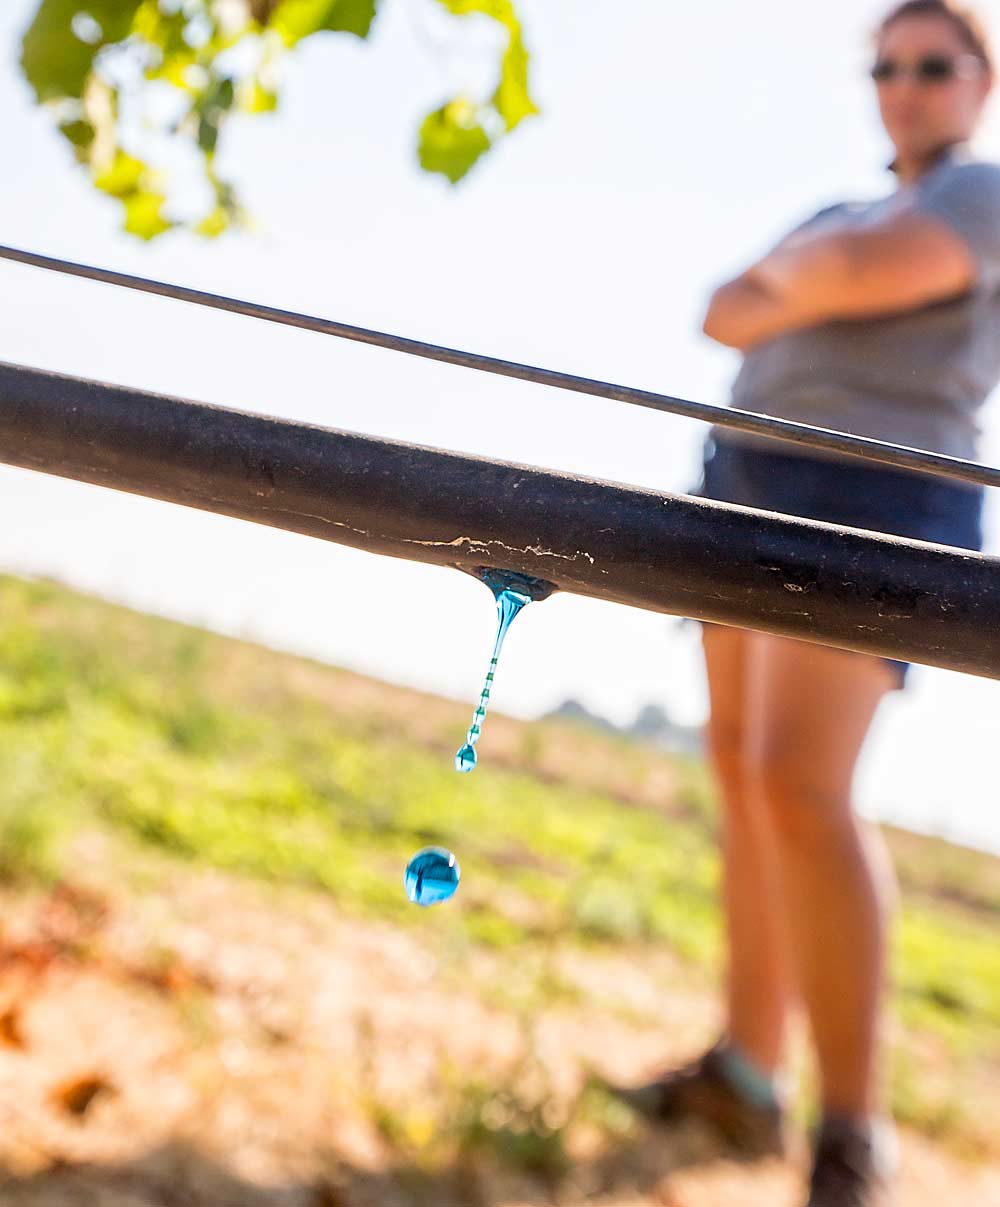 Blue dye is used as a tool to check drip irrigation systems for problems and flush lines of debris during a demonstration at the Washington State Viticulture Field Day in Prosser, Washington, in 2015. (TJ Mullinax/Good Fruit Grower)